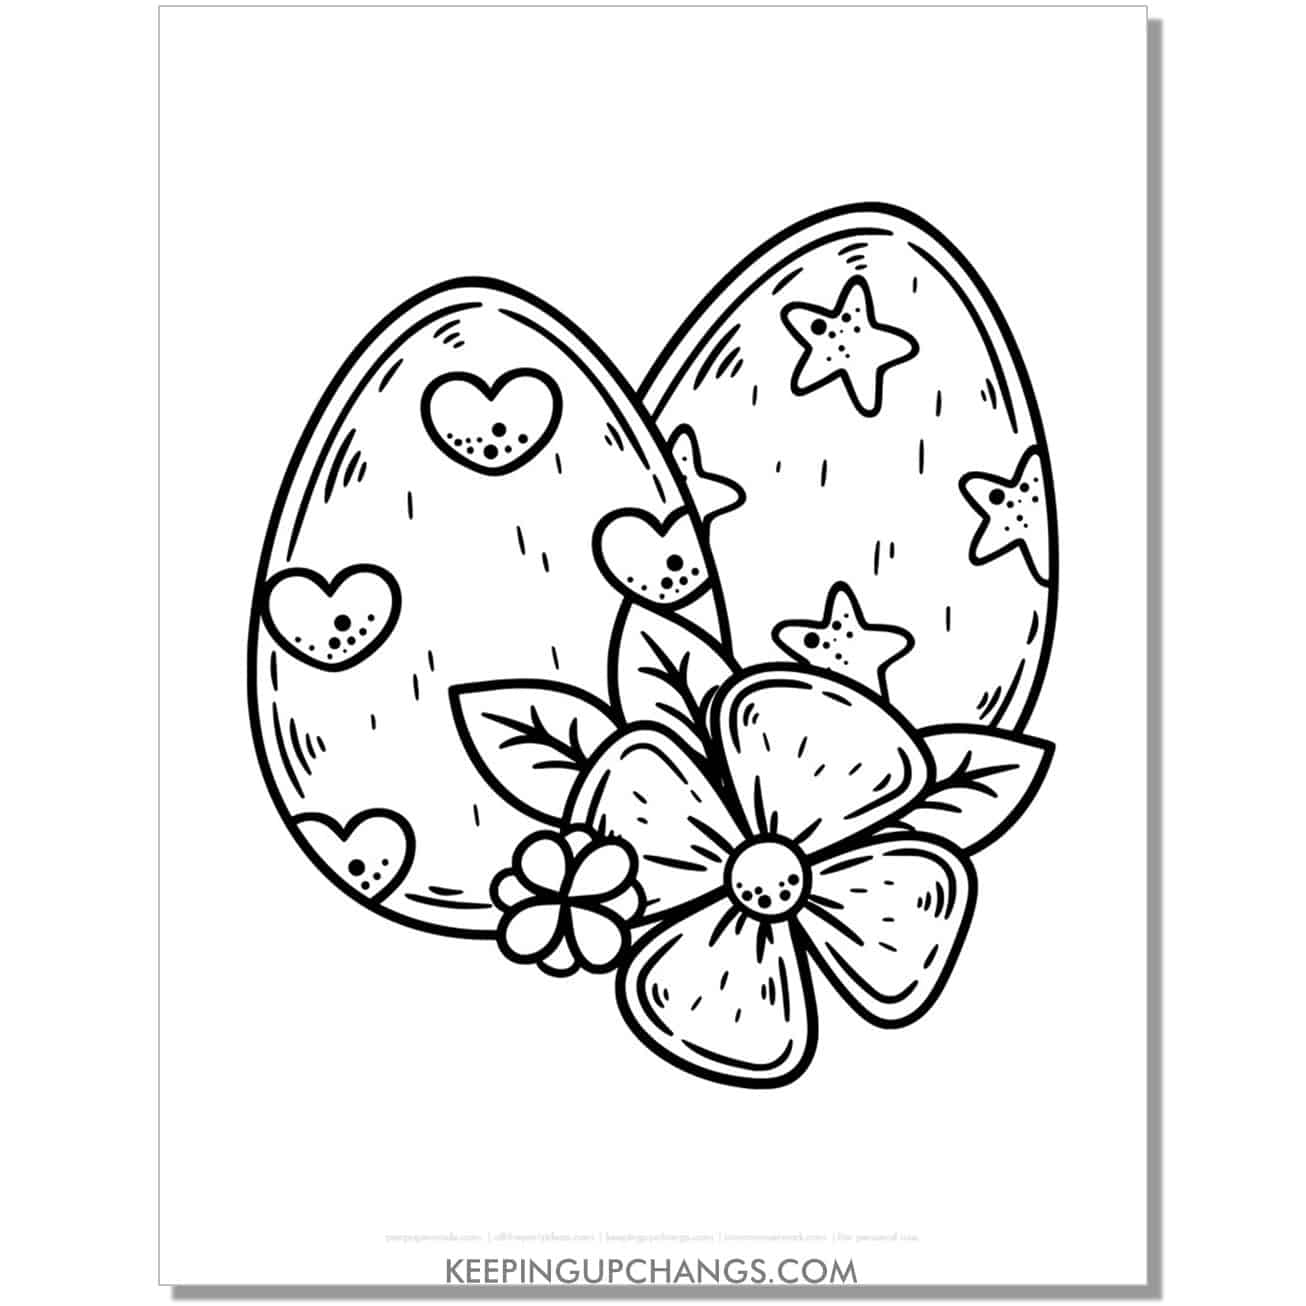 easter eggs with hearts and stars coloring page, sheet.